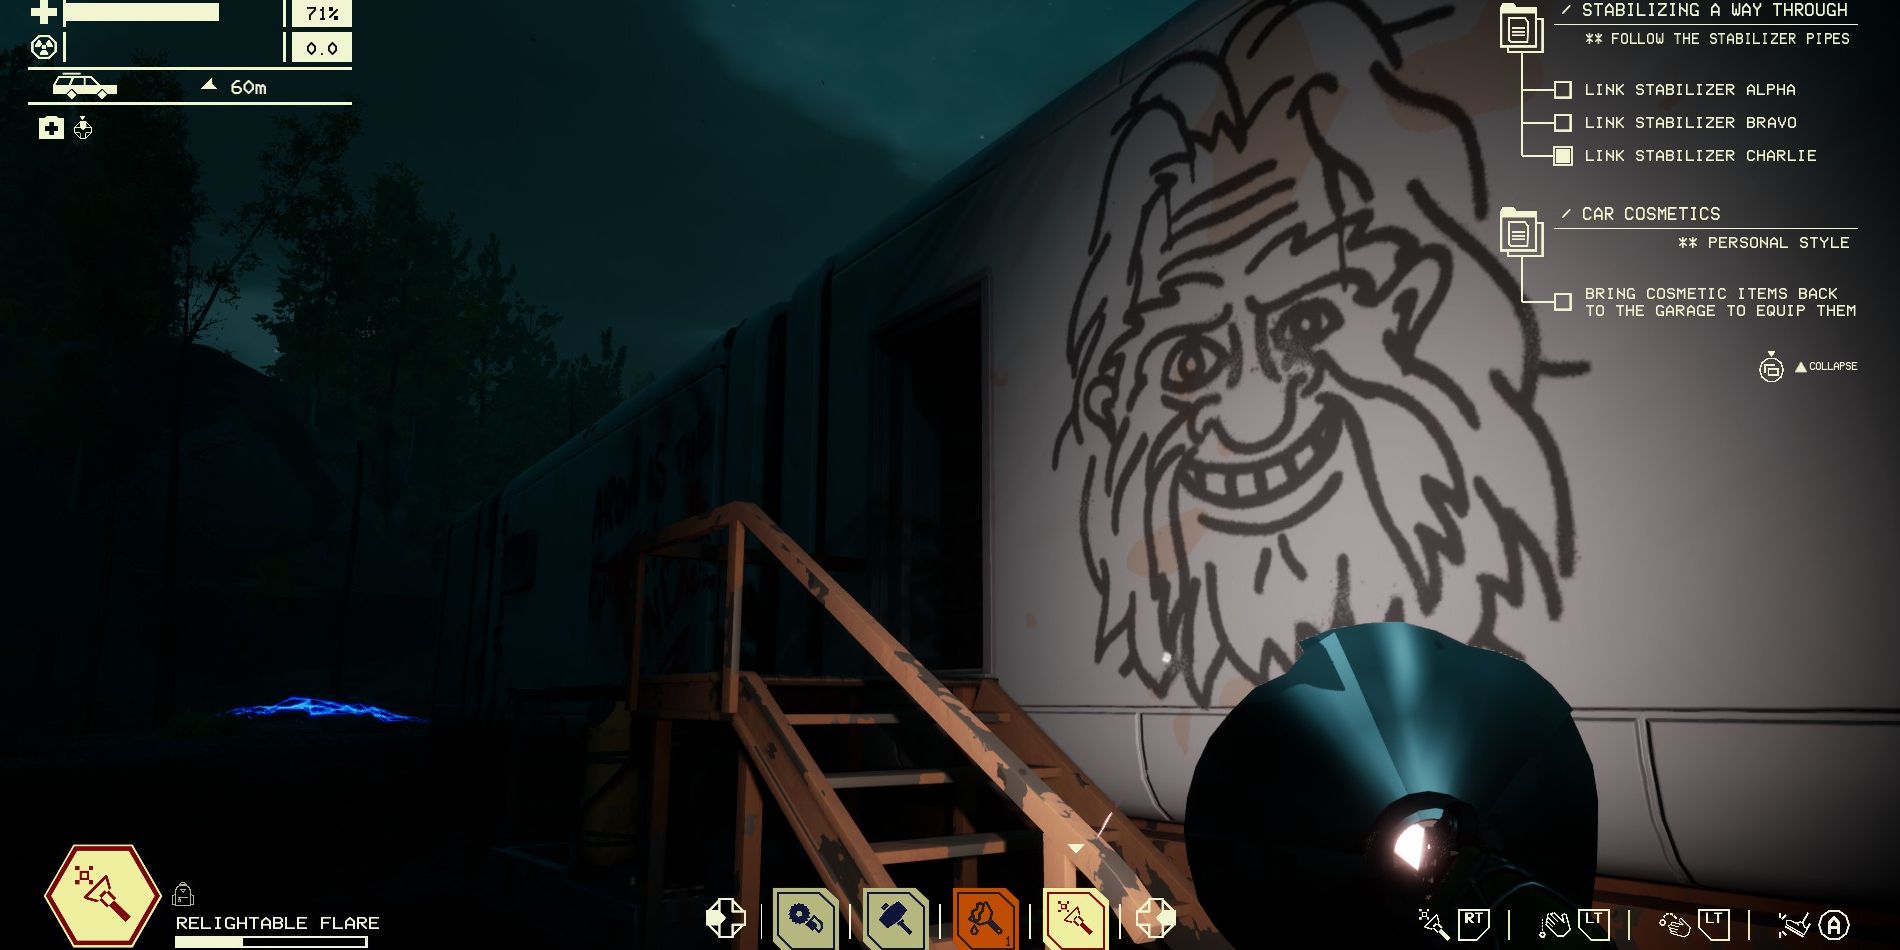 Screenshot from Pacific Drive show a comical drawing of a smiling big foot creature on the side of an abandoned trailer.